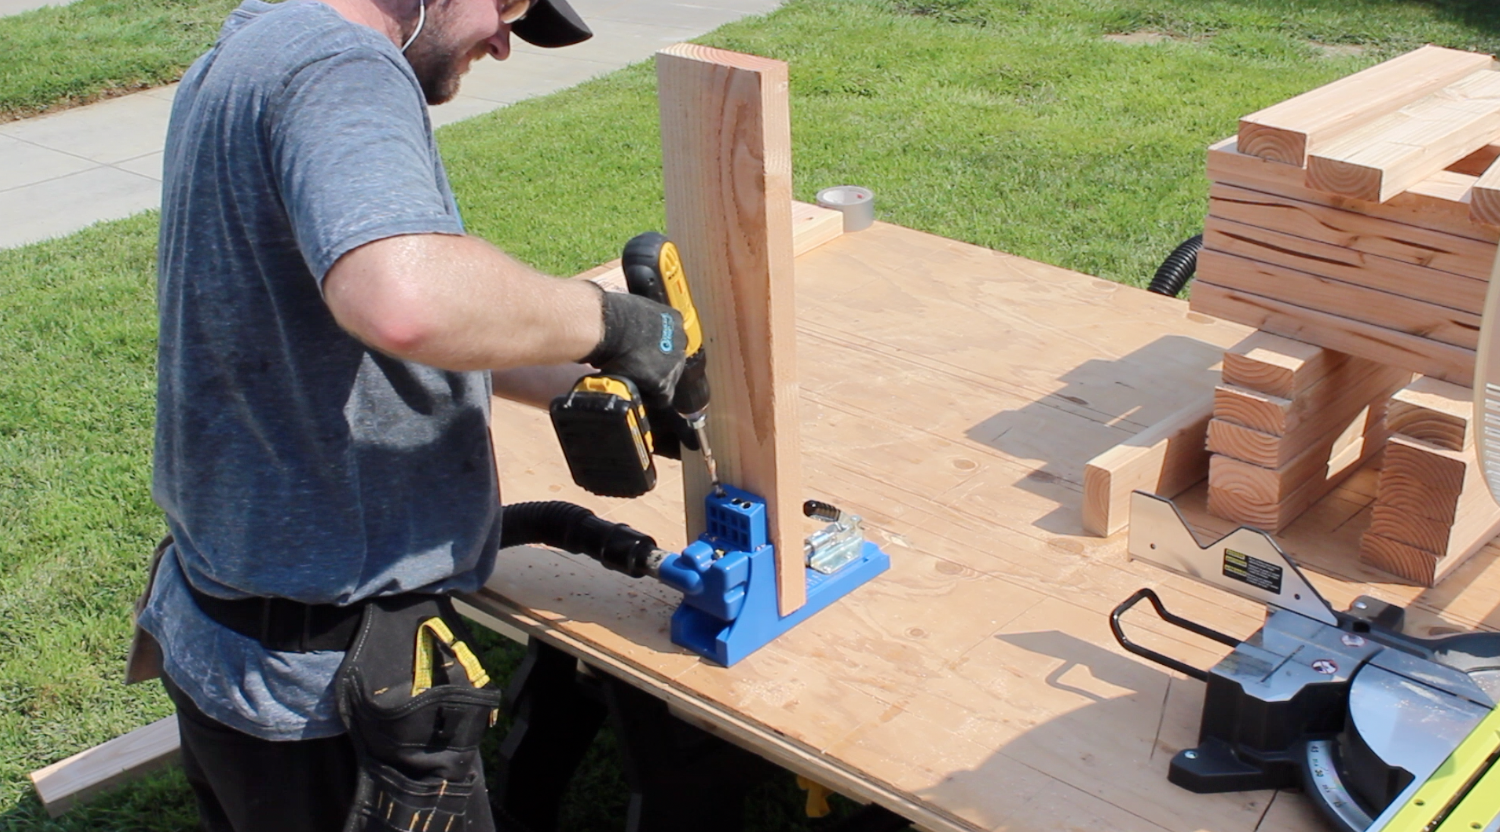 Drilling pocket holes for workbench joints